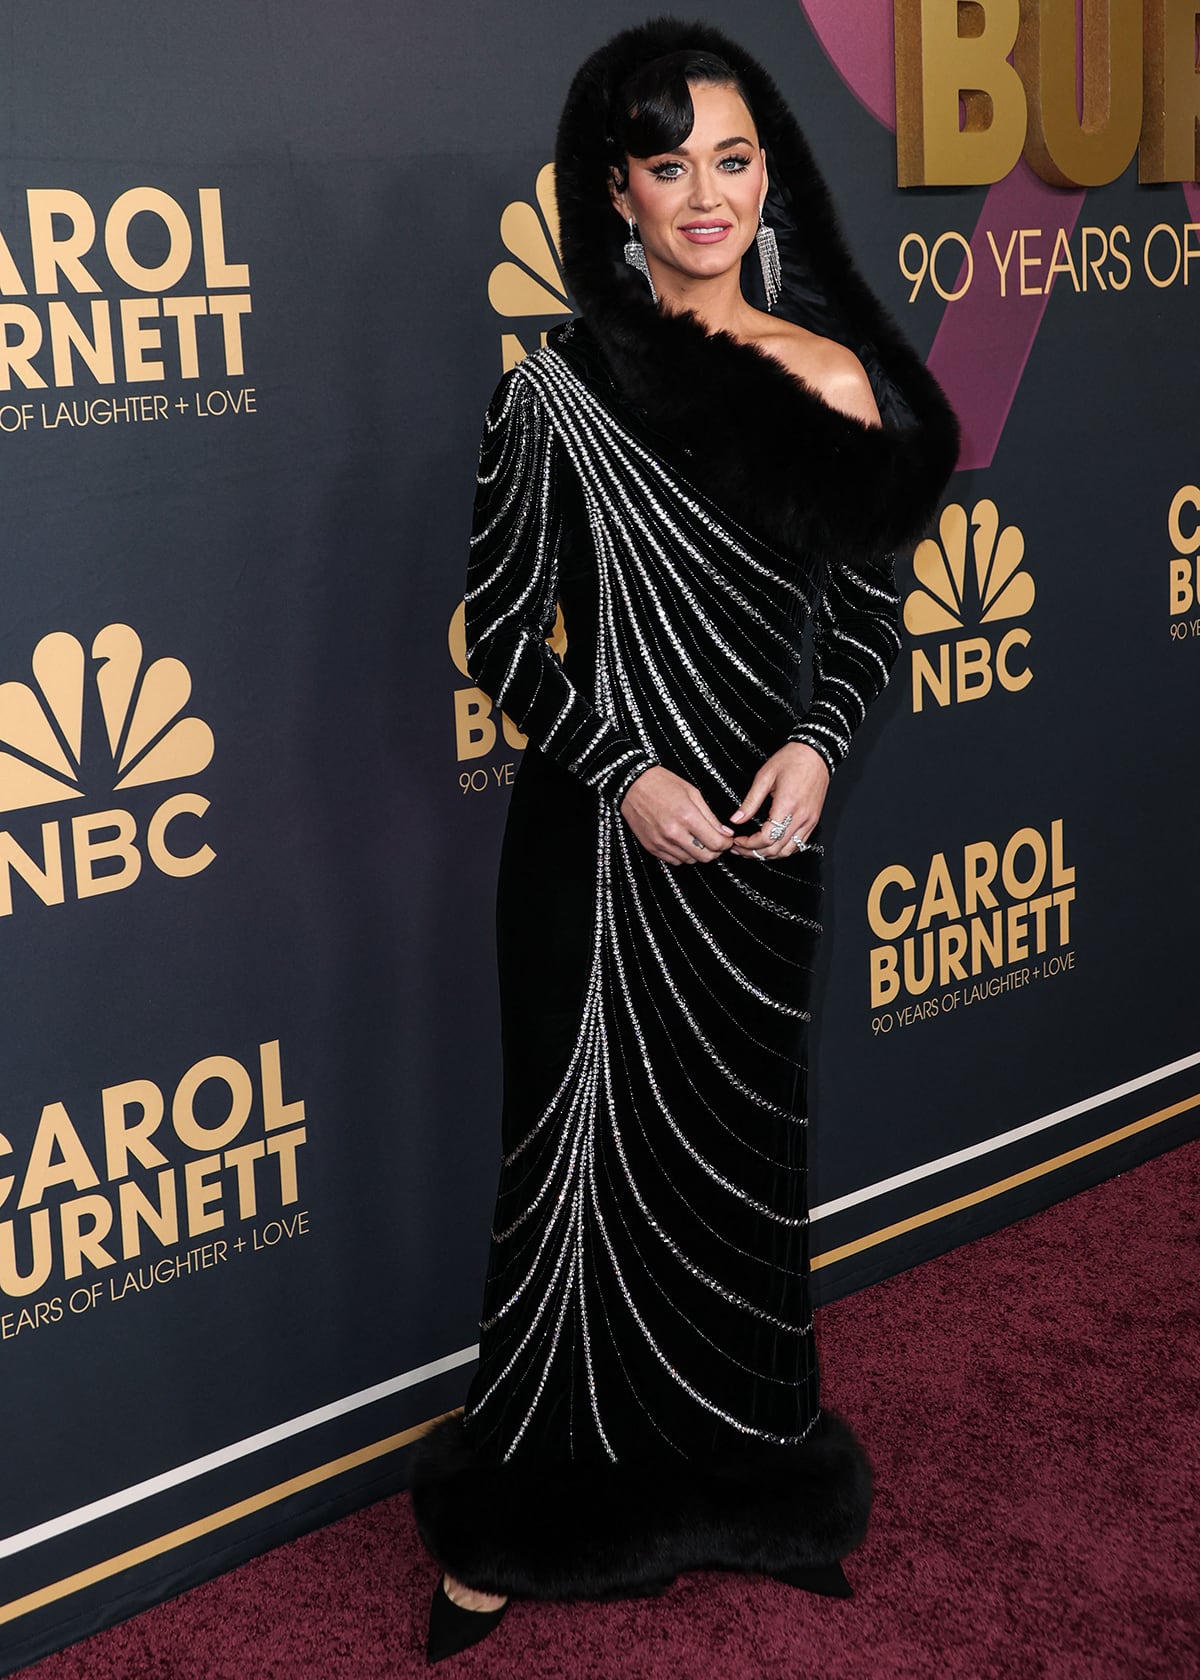 Katy Perry attends NBC's Carol Burnett: 90 Years of Laughter + Love birthday special at Avalon Hollywood & Bardot on March 2, 2023